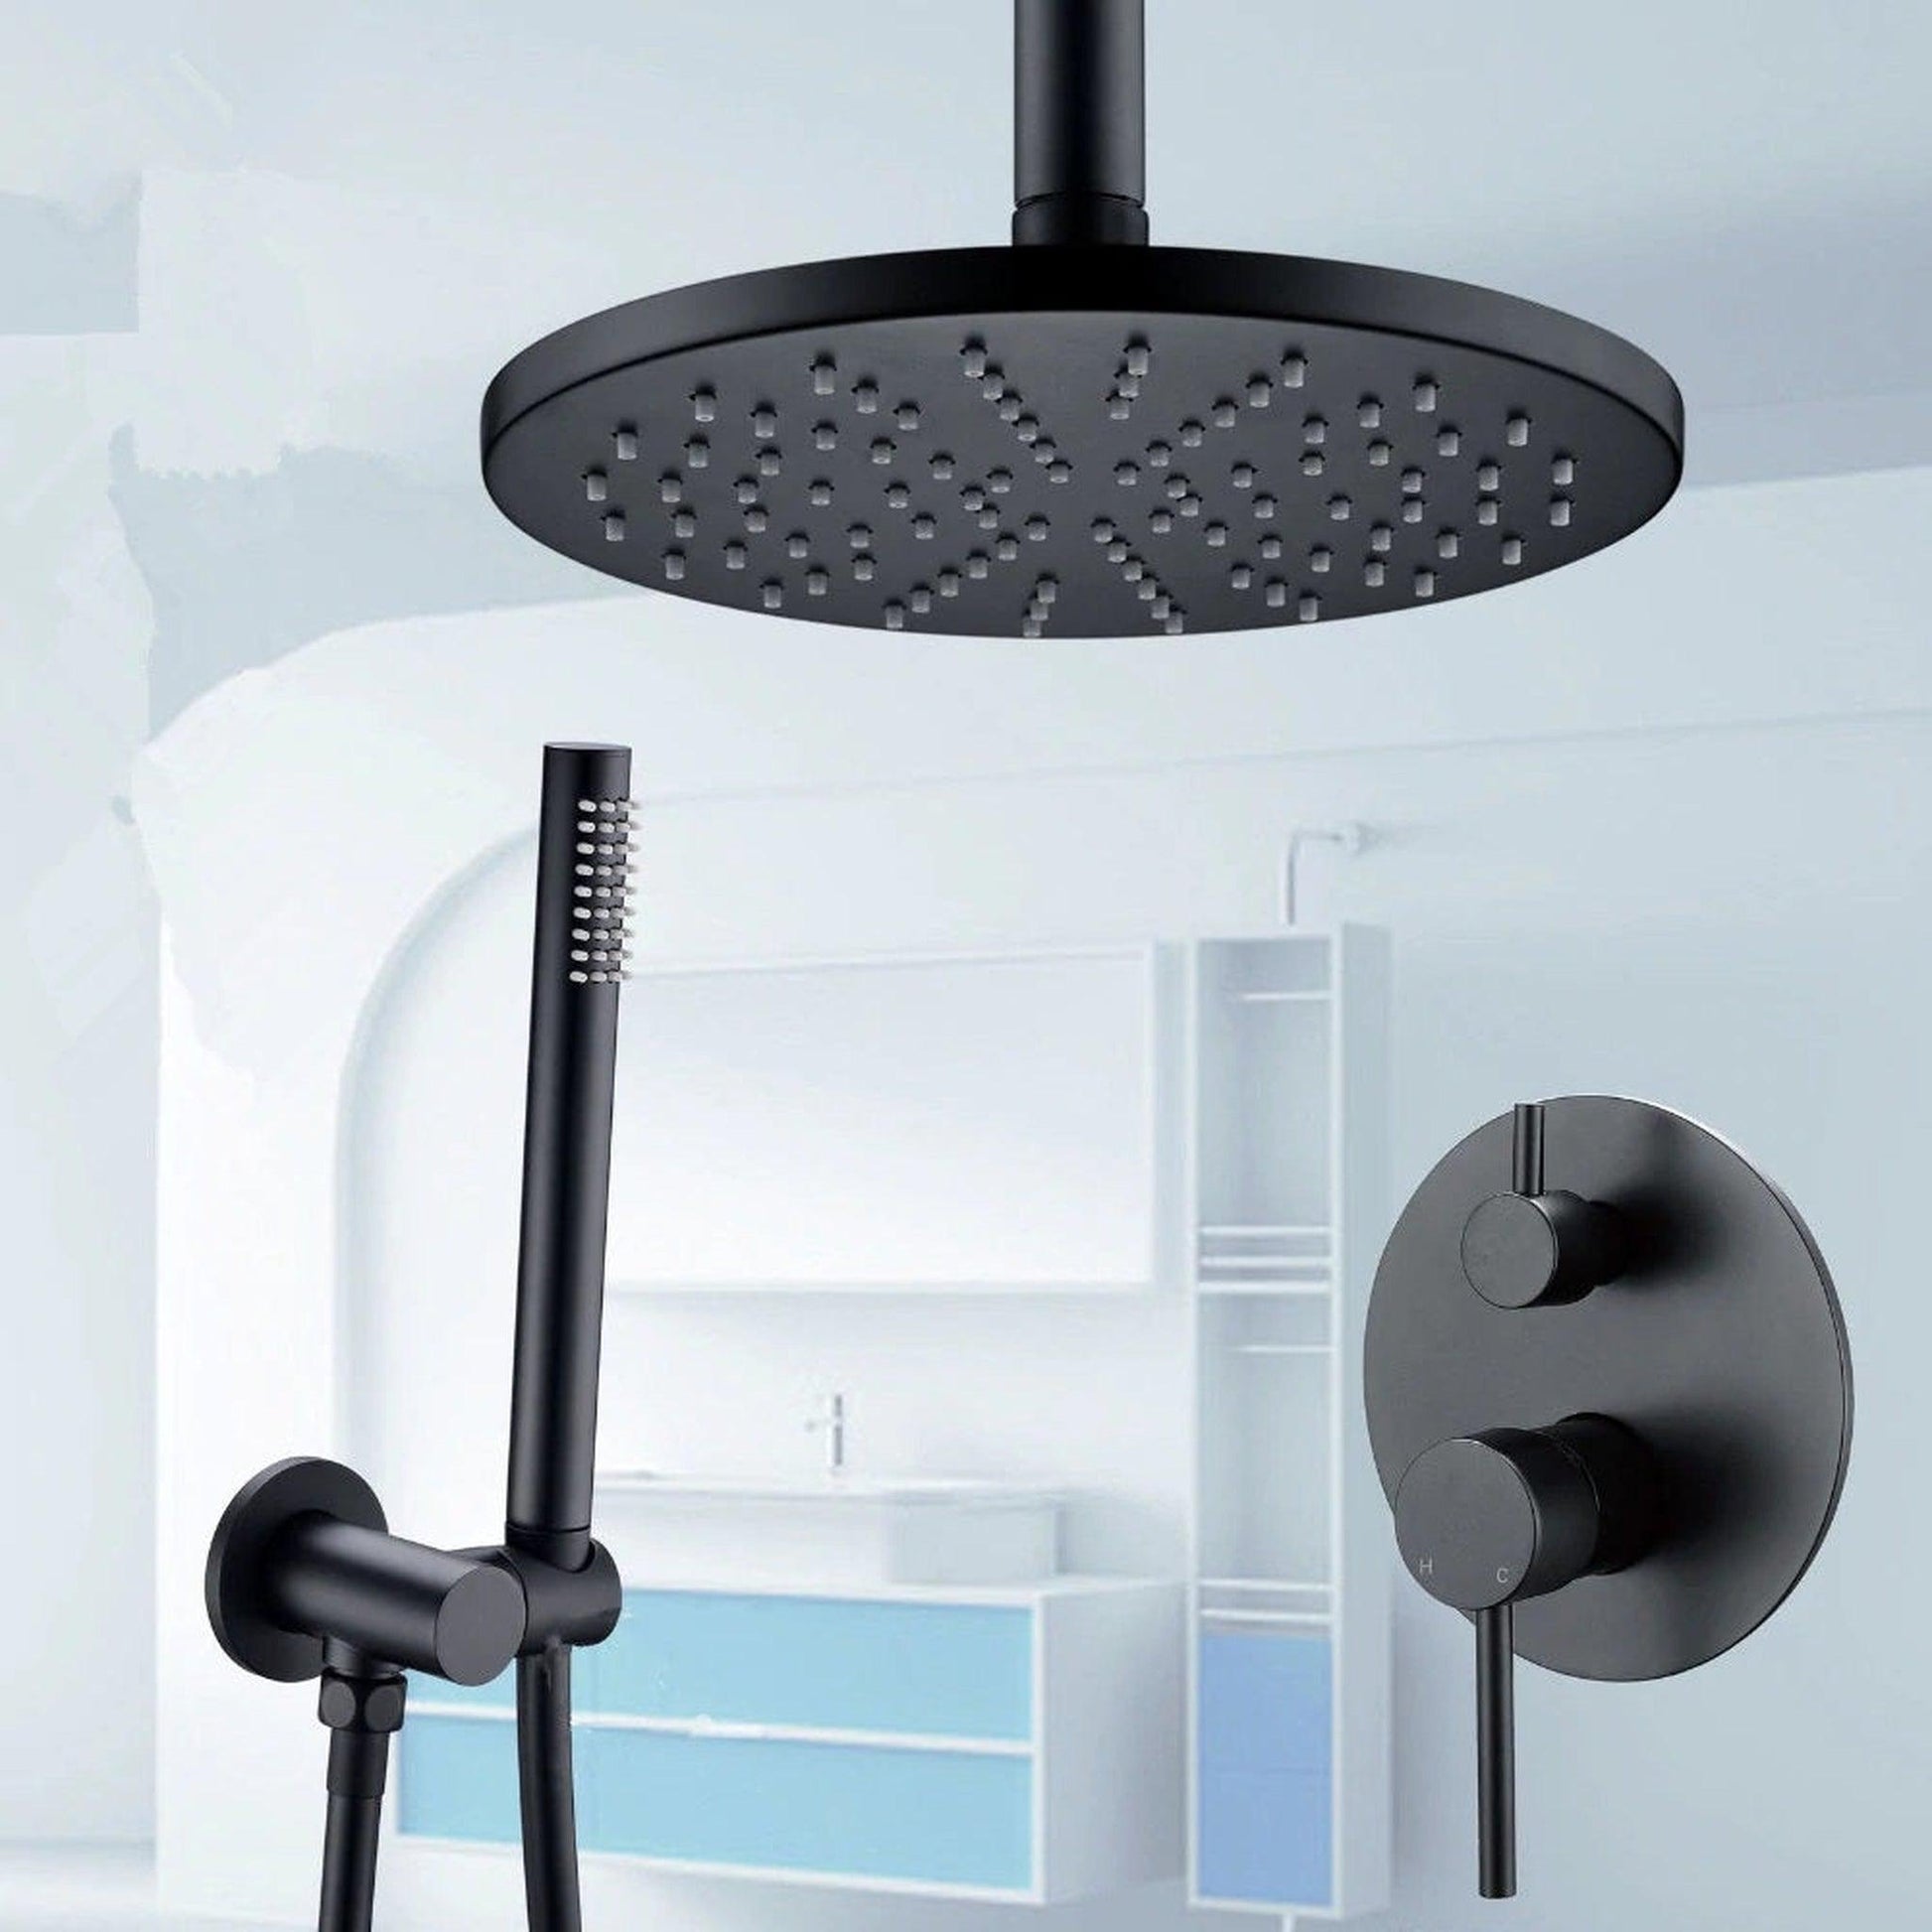 https://usbathstore.com/cdn/shop/files/FontanaShowers-Verona-Creative-Luxury-8-Dark-Oil-Rubbed-Bronze-Round-Ceiling-Mounted-Shower-Head-Hot-and-Cold-Mixer-Rainfall-Shower-System-With-Hand-Shower-3.jpg?v=1683630406&width=1946